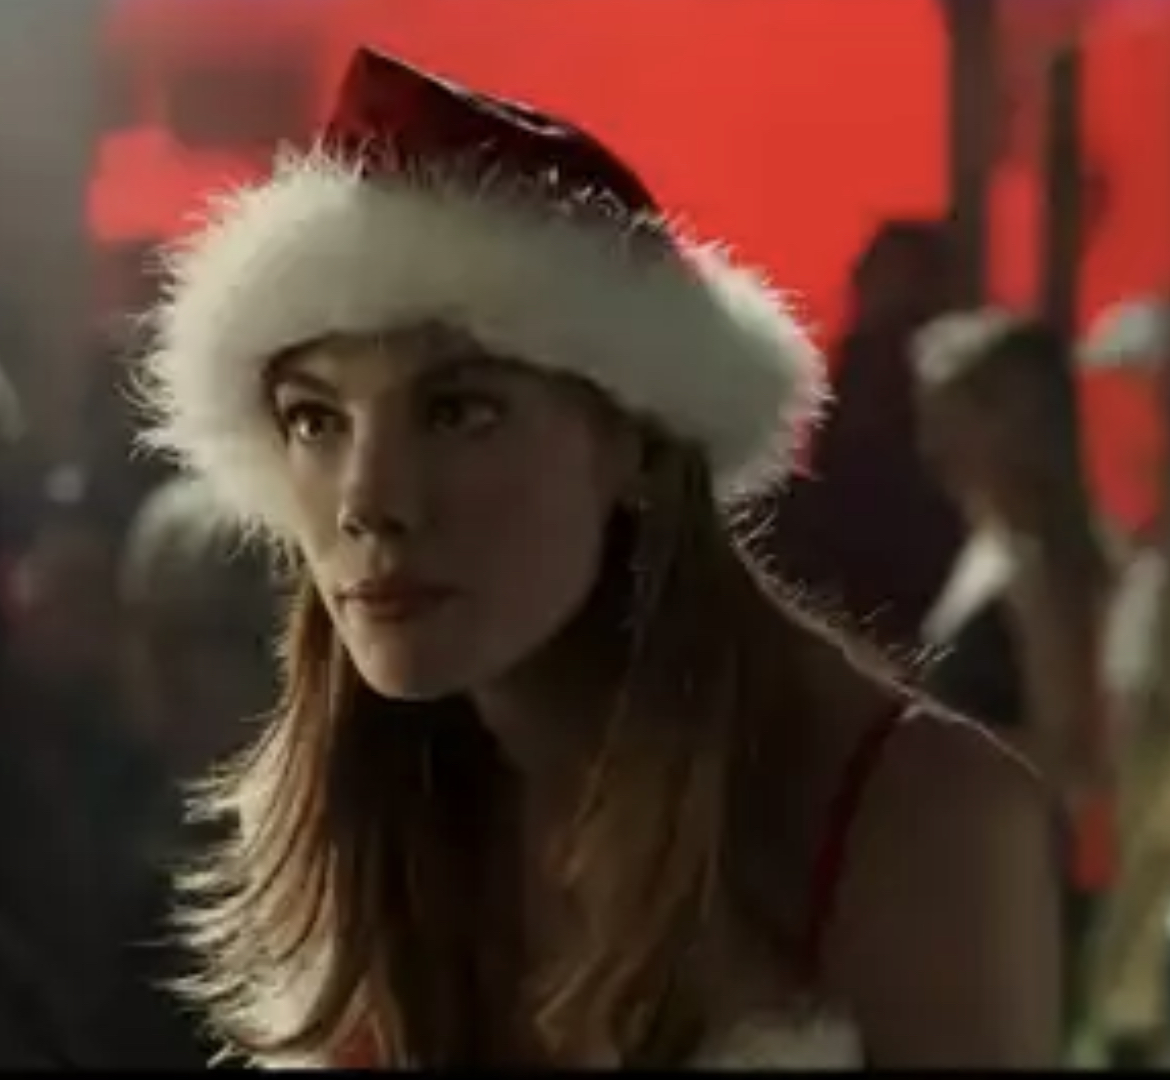 Michelle Monaghan in hot red XMAS top